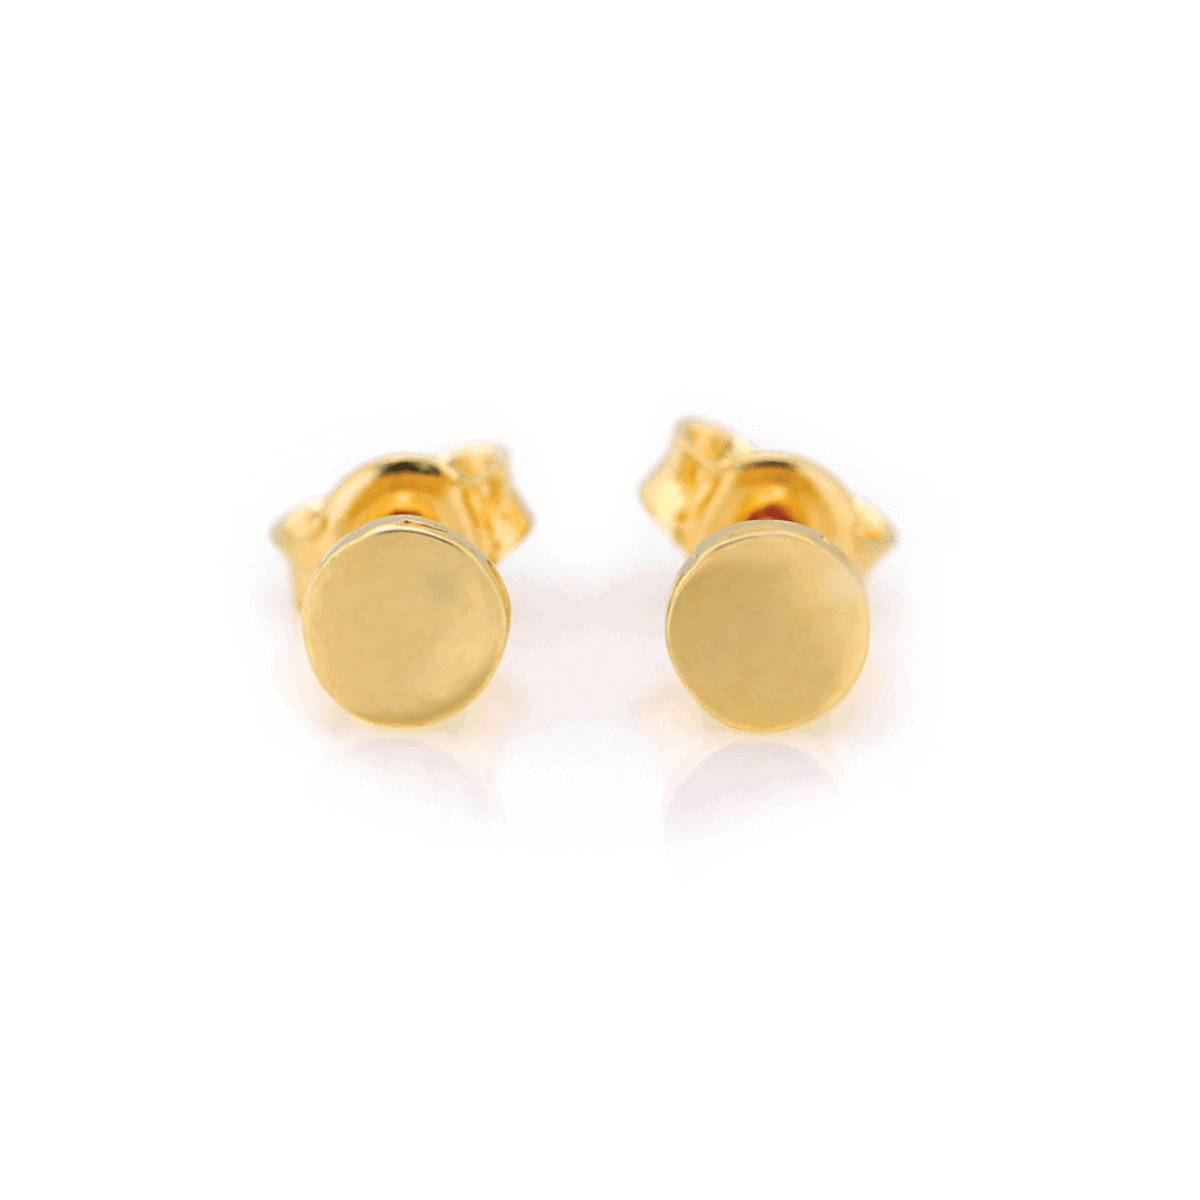 Delicate gold earrings on a light background